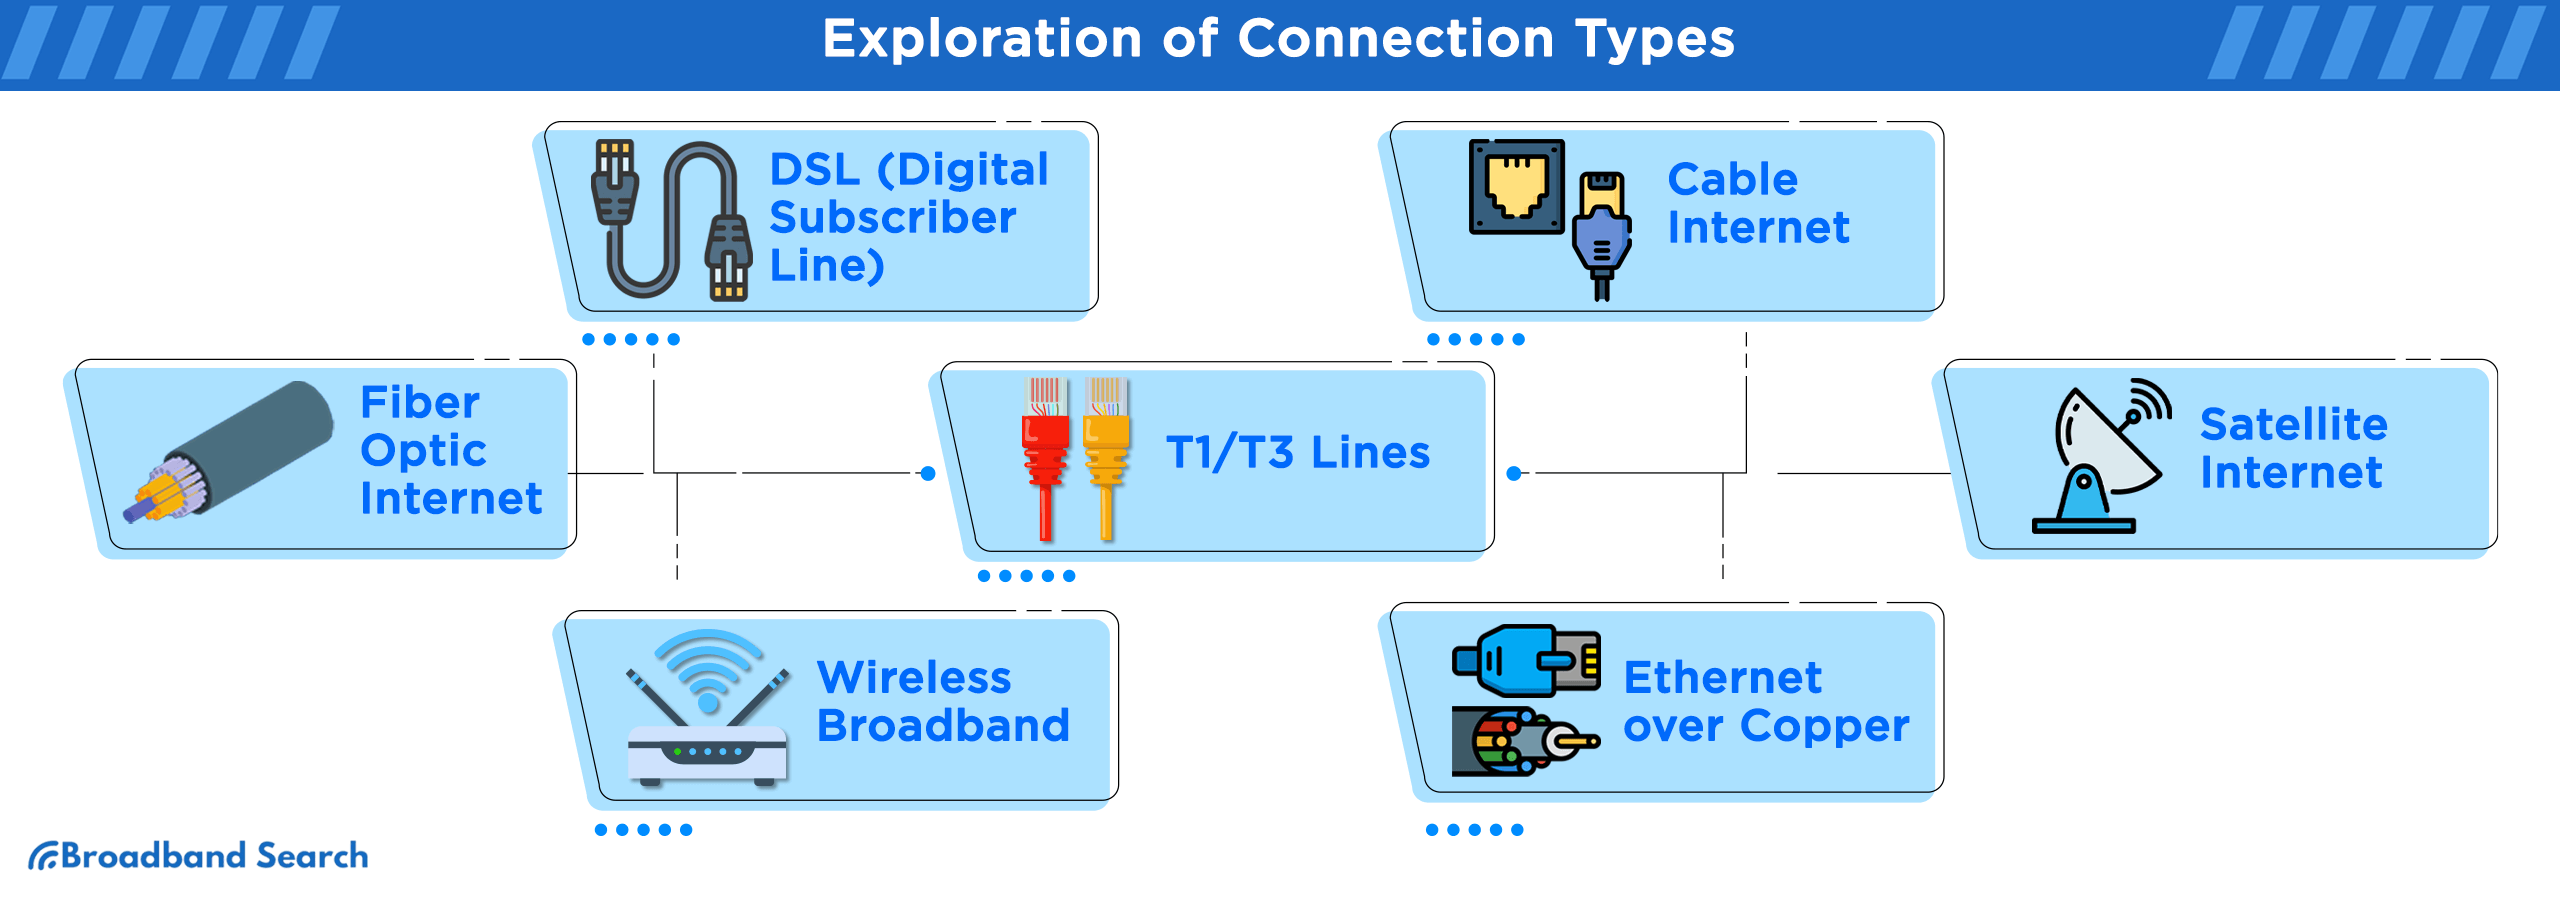 Exploration of different connection types